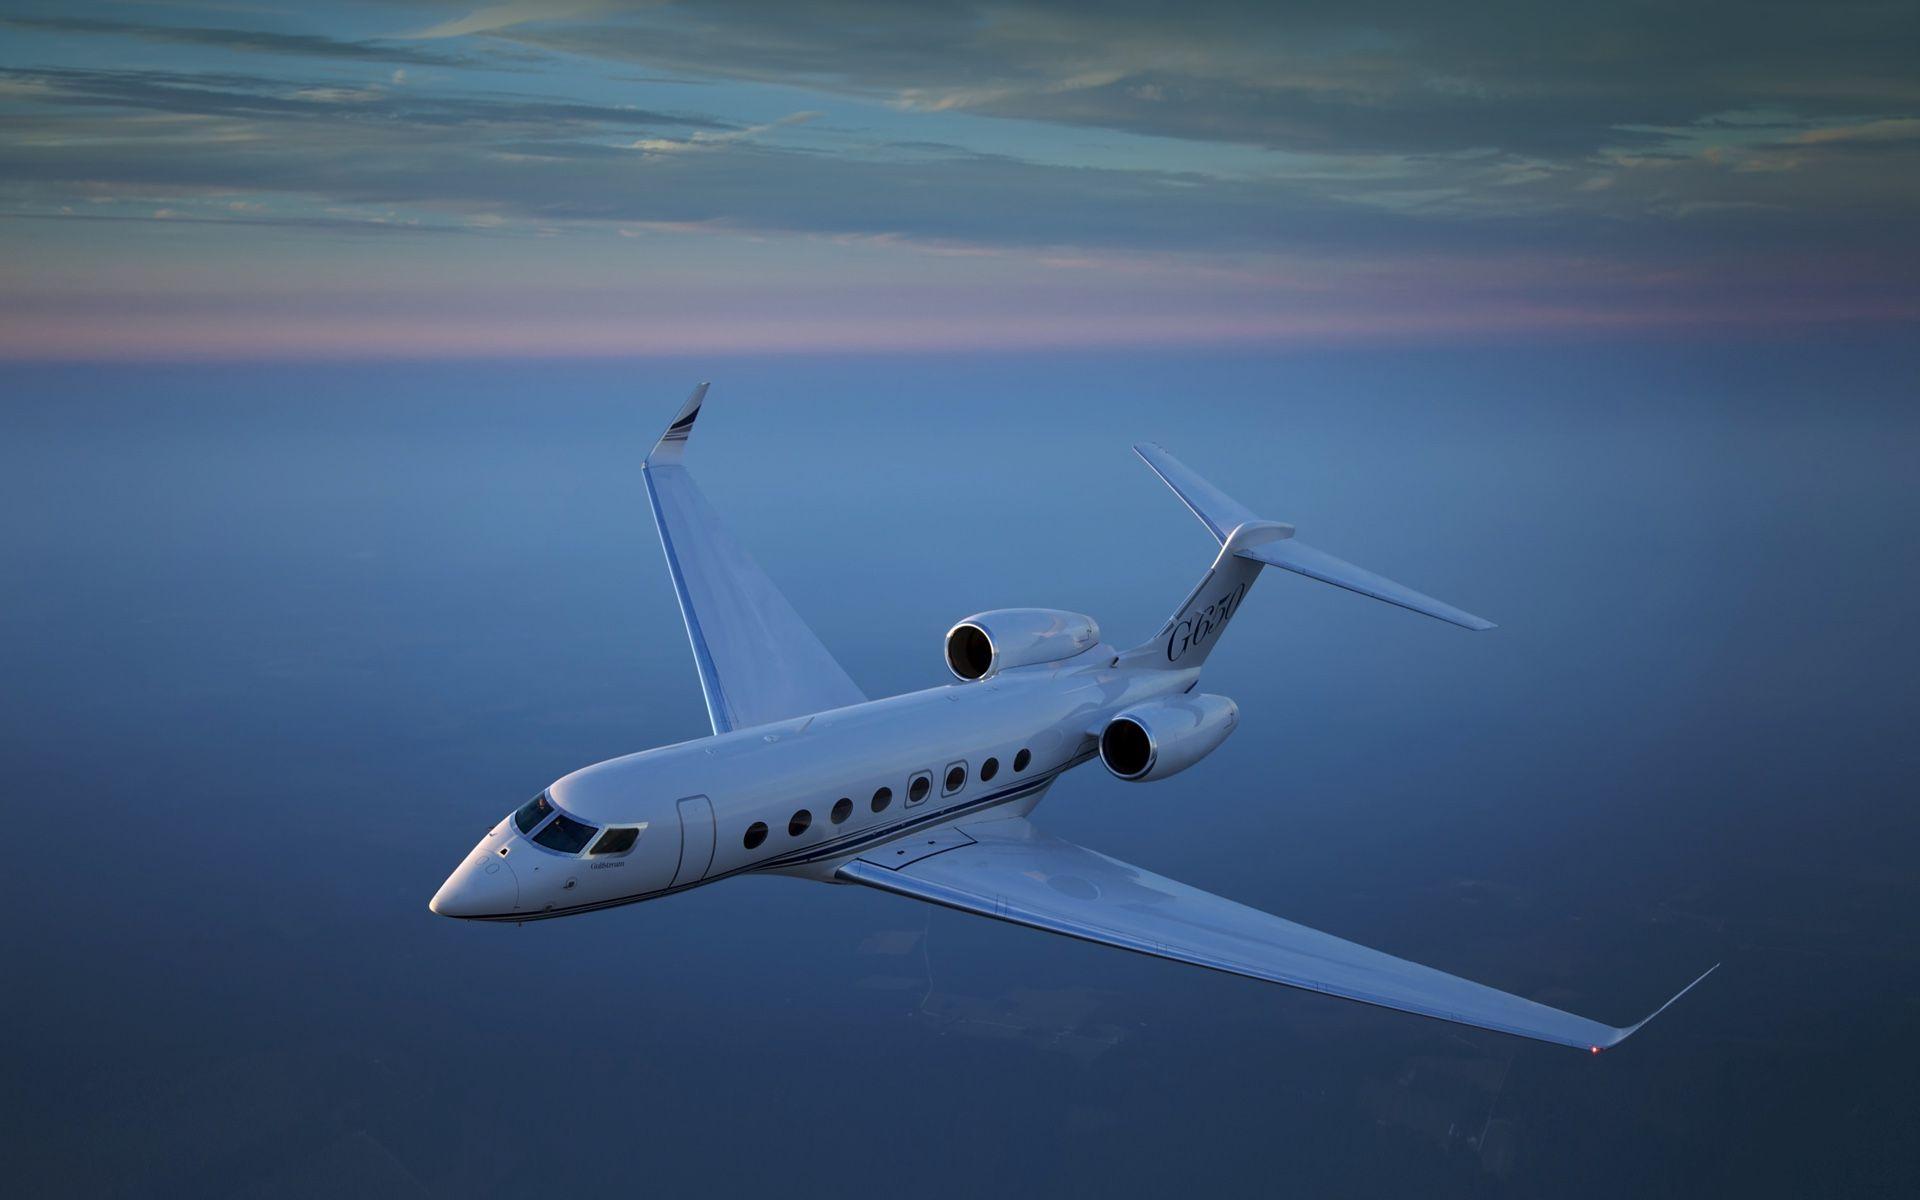 JetSmarter Joins Forces With Jet Edge For New World Class Membership